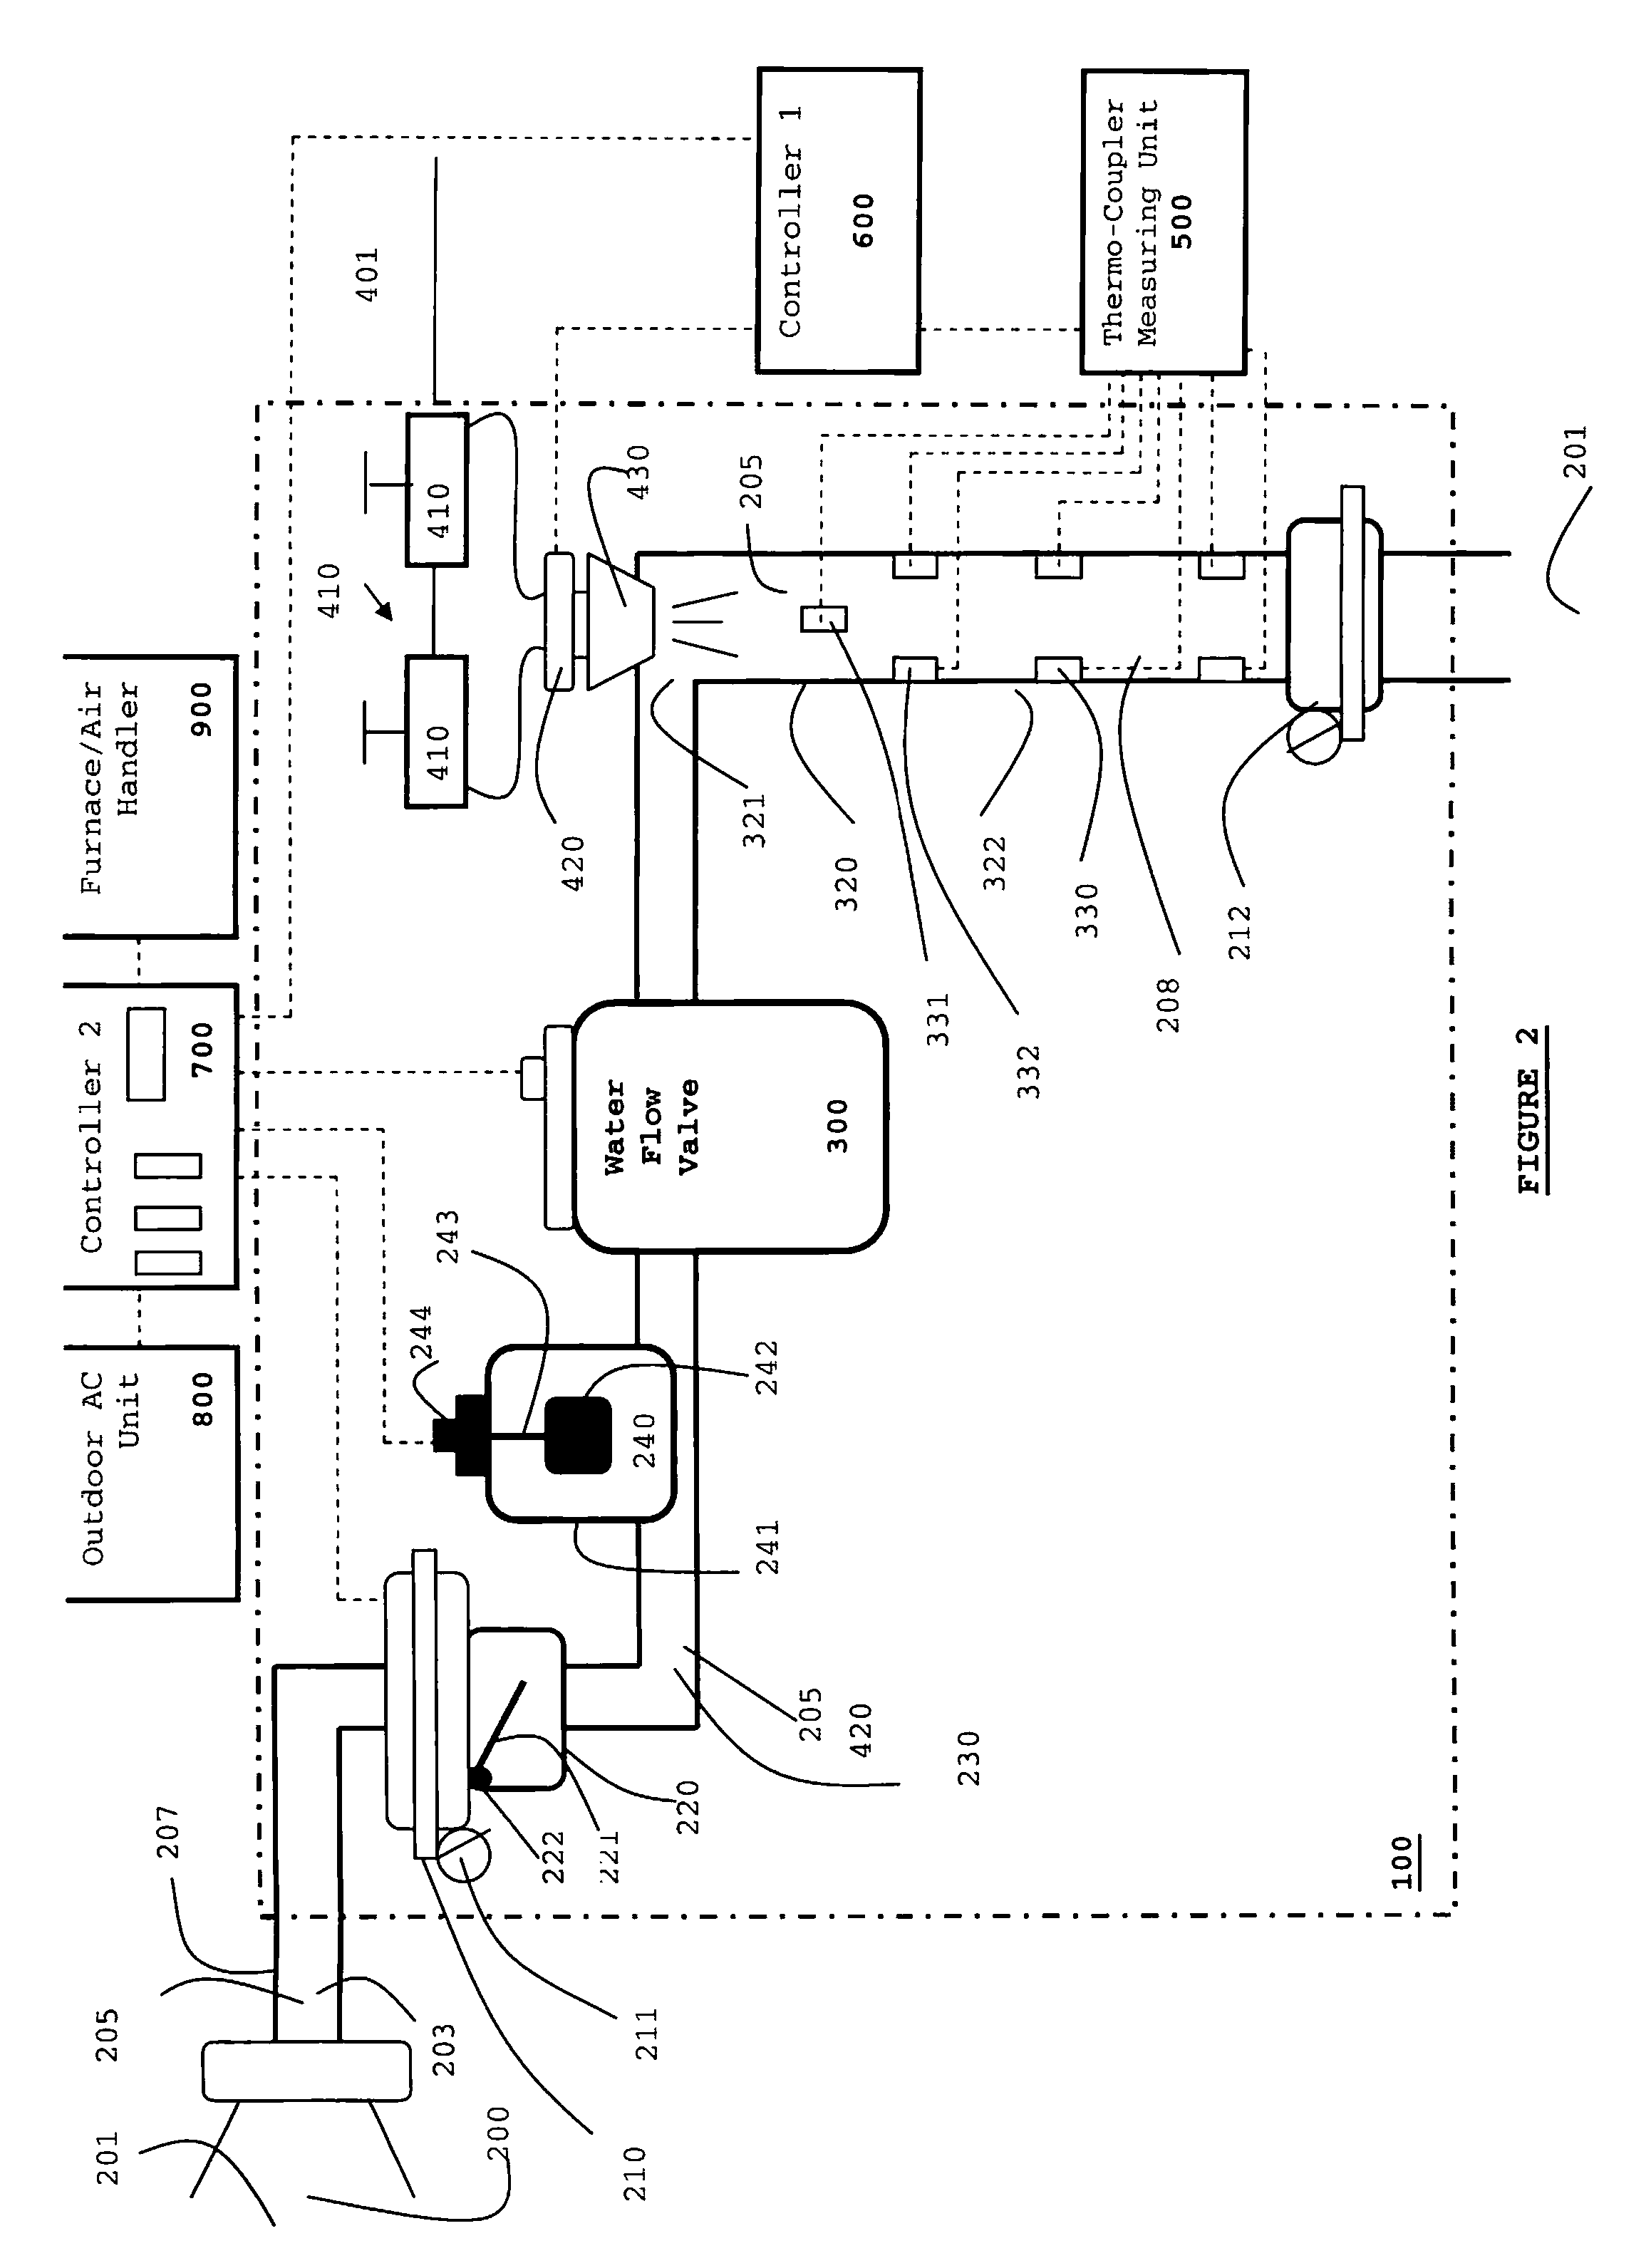 Self-sanitizing automated condensate drain cleaner and related method of use